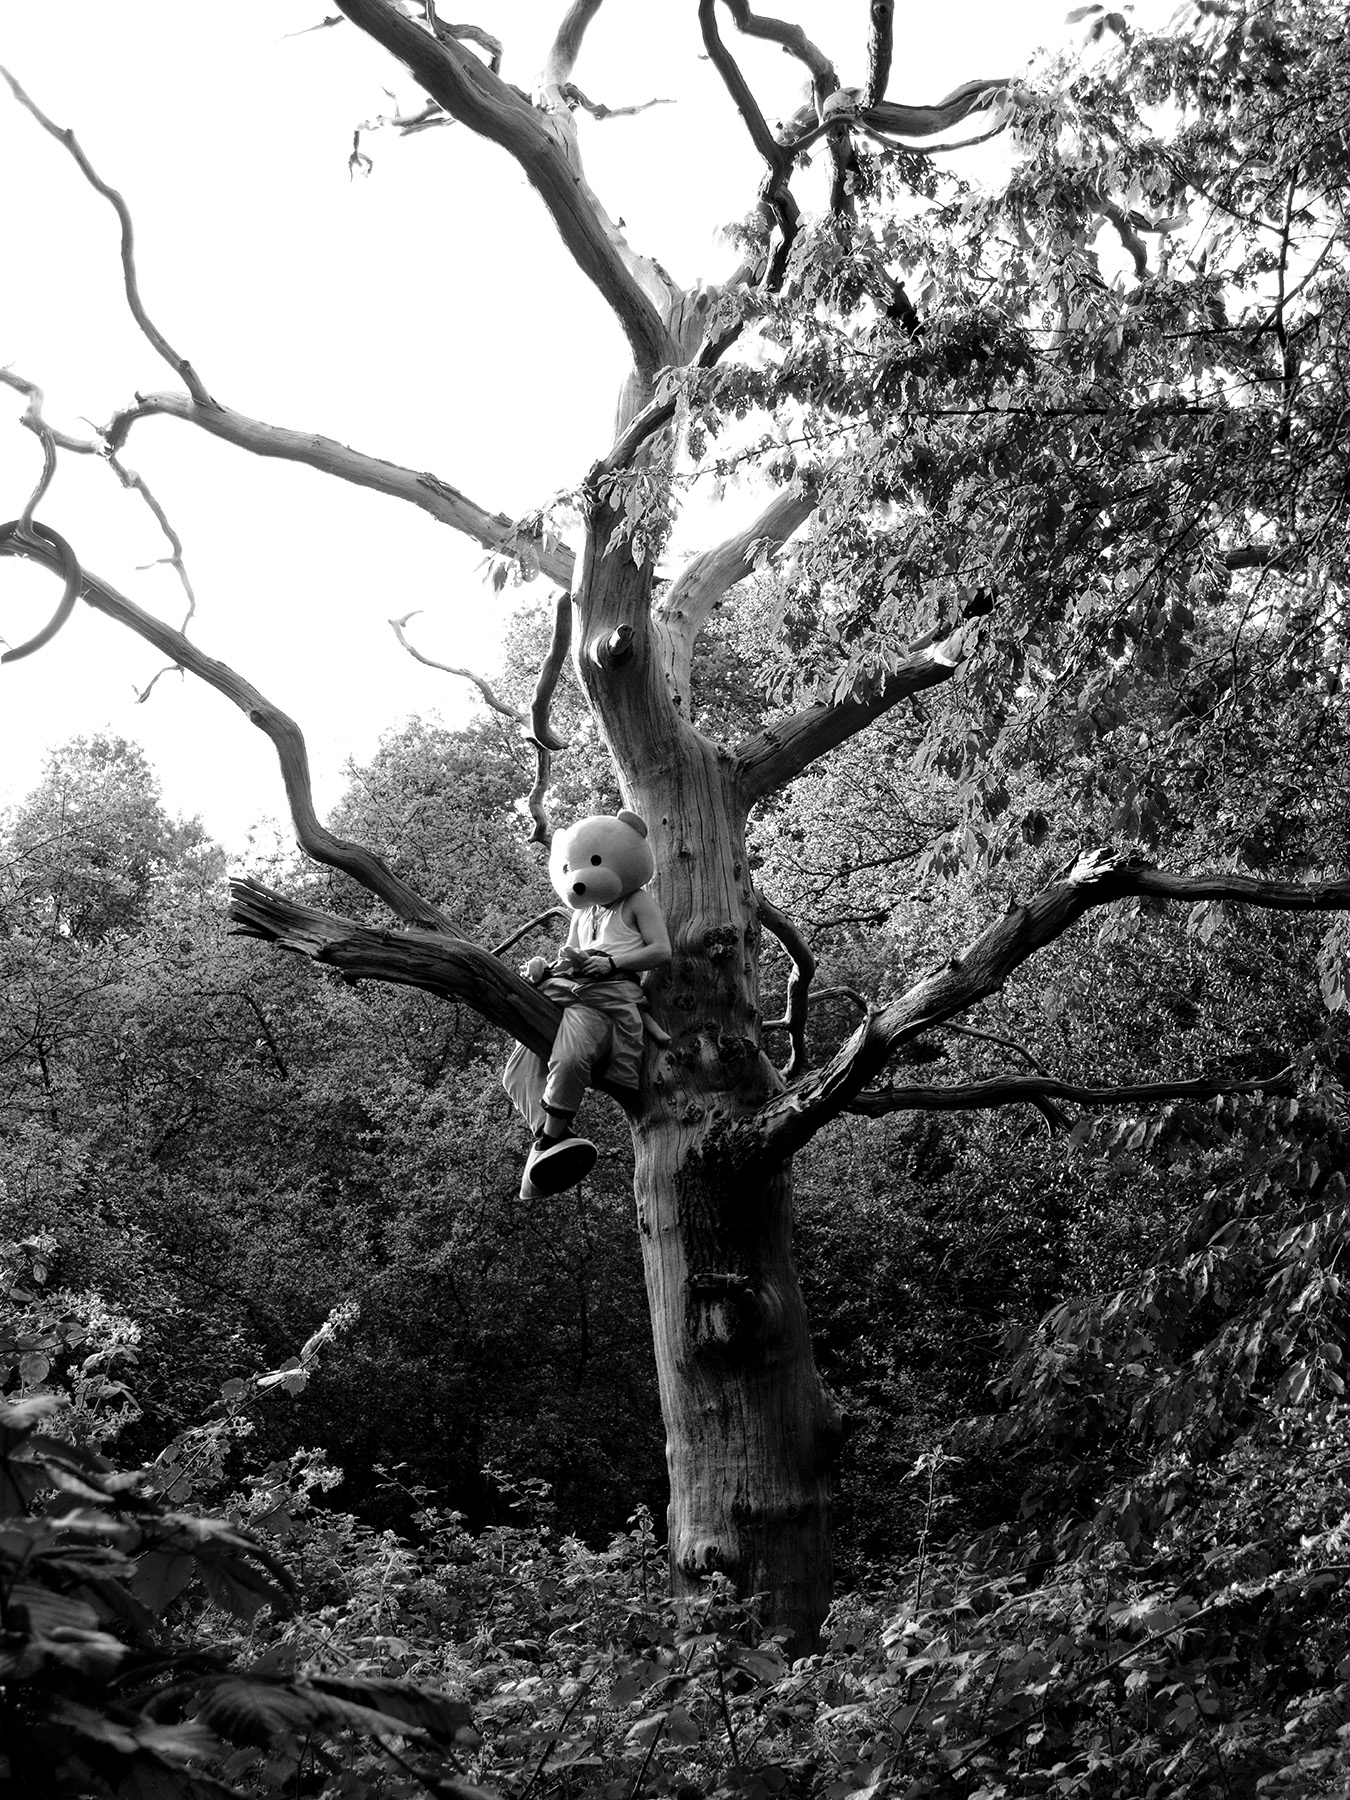 pink bear climbing a tree in epping forest. Black and white photograph.